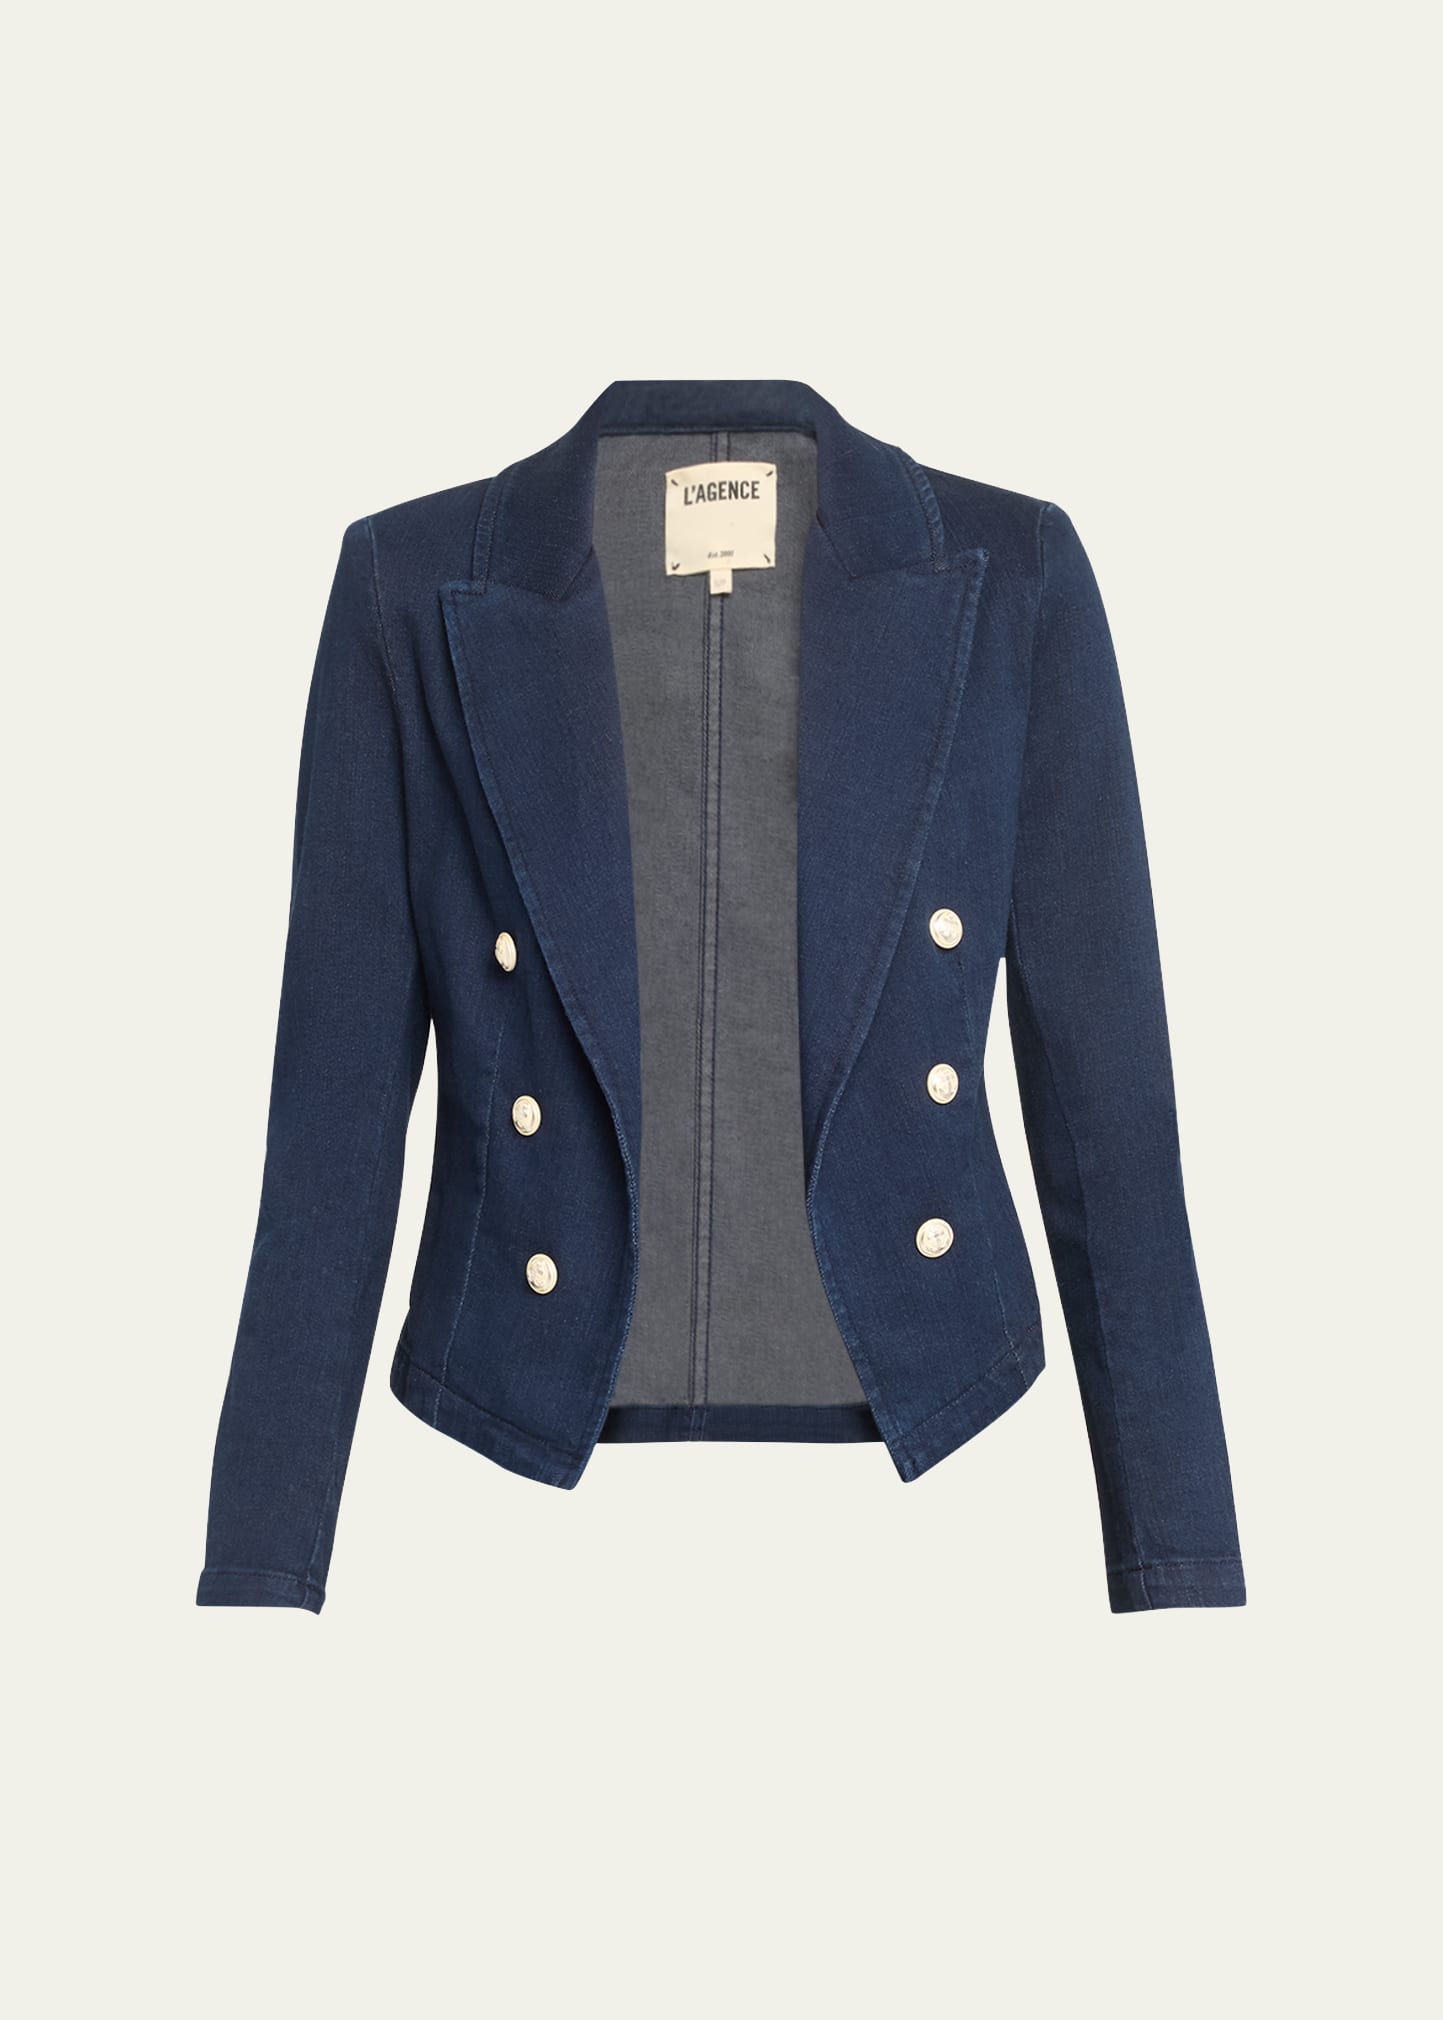 L AGENCE WAYNE CROPPED DOUBLE-BREASTED JACKET